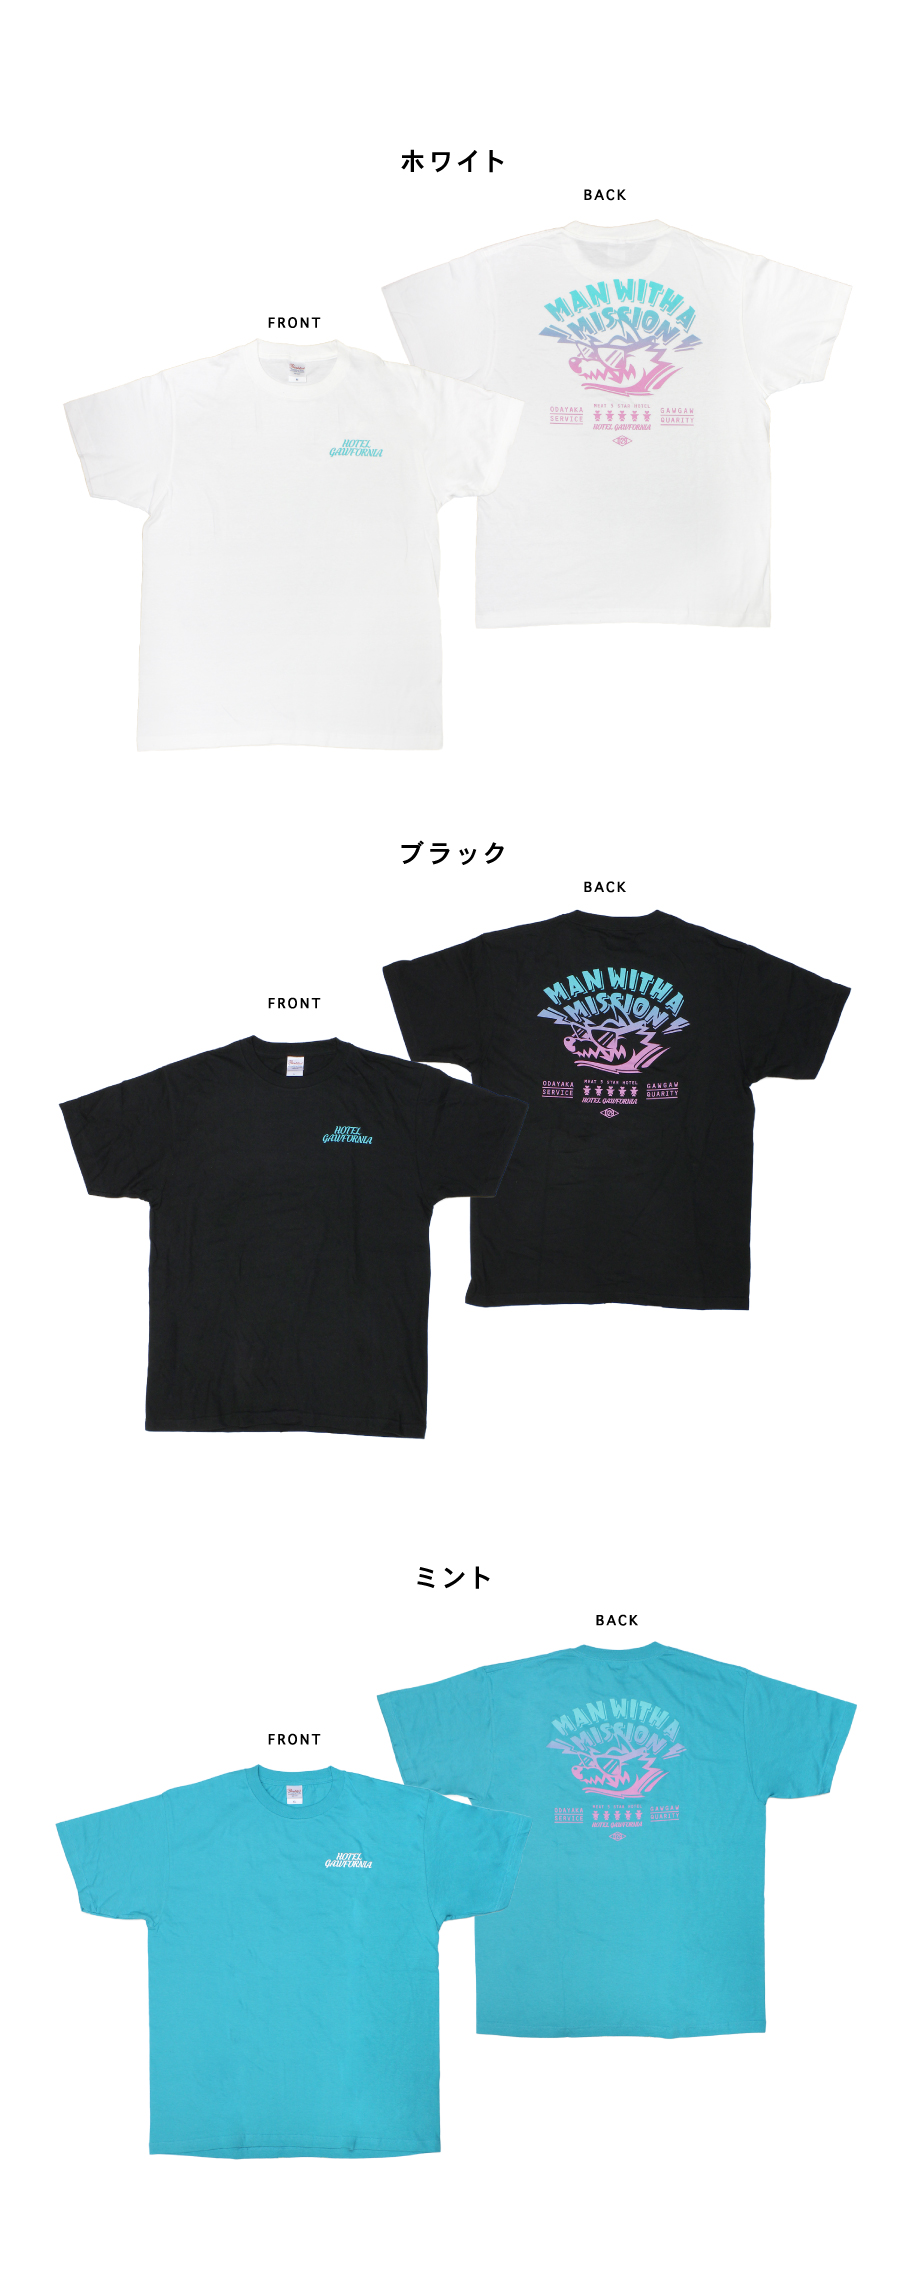 MAN WITH A MISSION　HOTEL GAW Tシャツ　マンウィズ